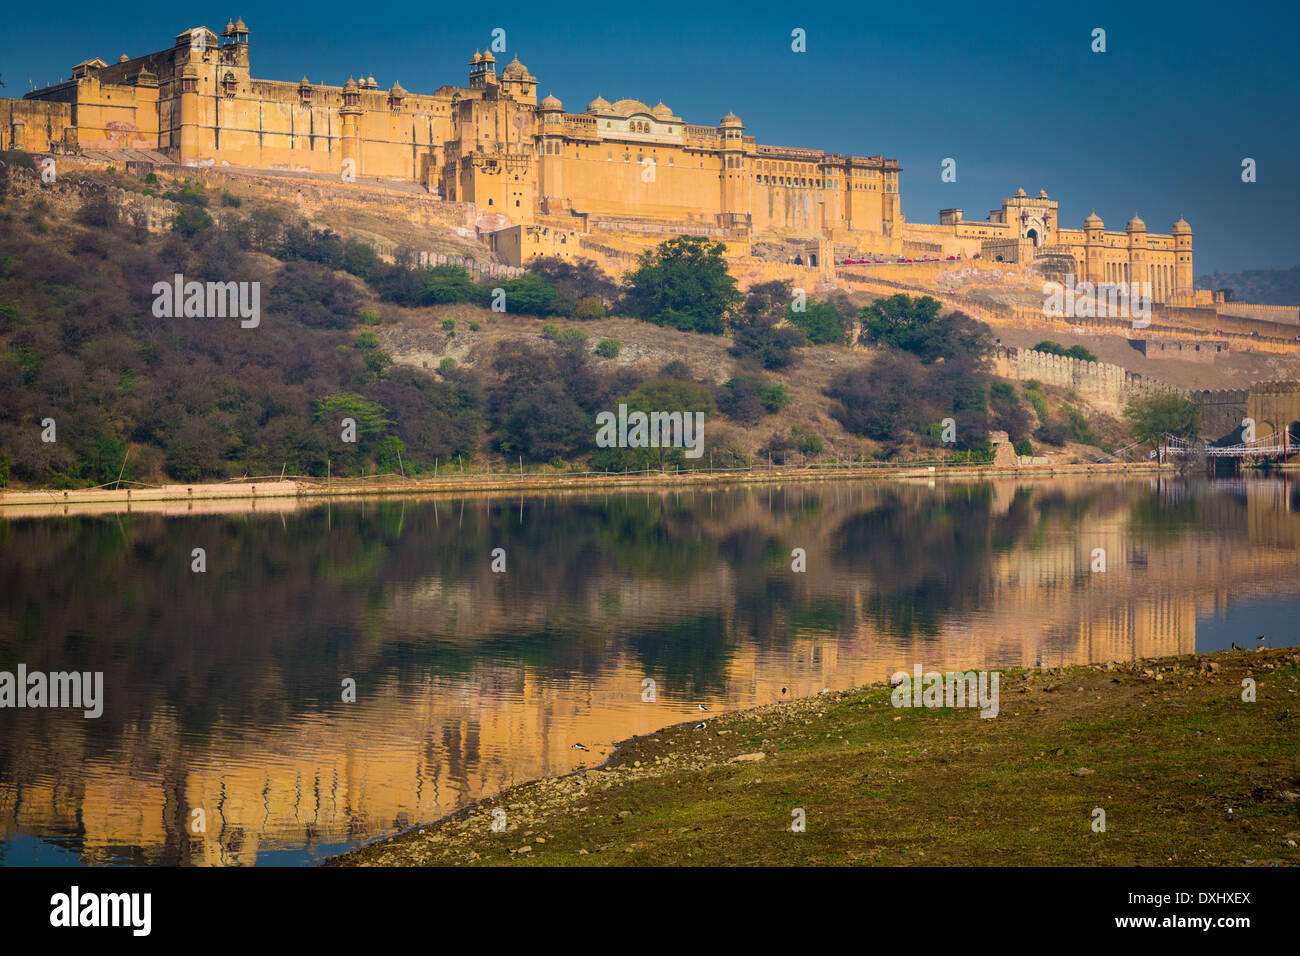 Amer Fort is located in Amer 6.8 mi from Jaipur, Rajasthan state, India Stock Photo